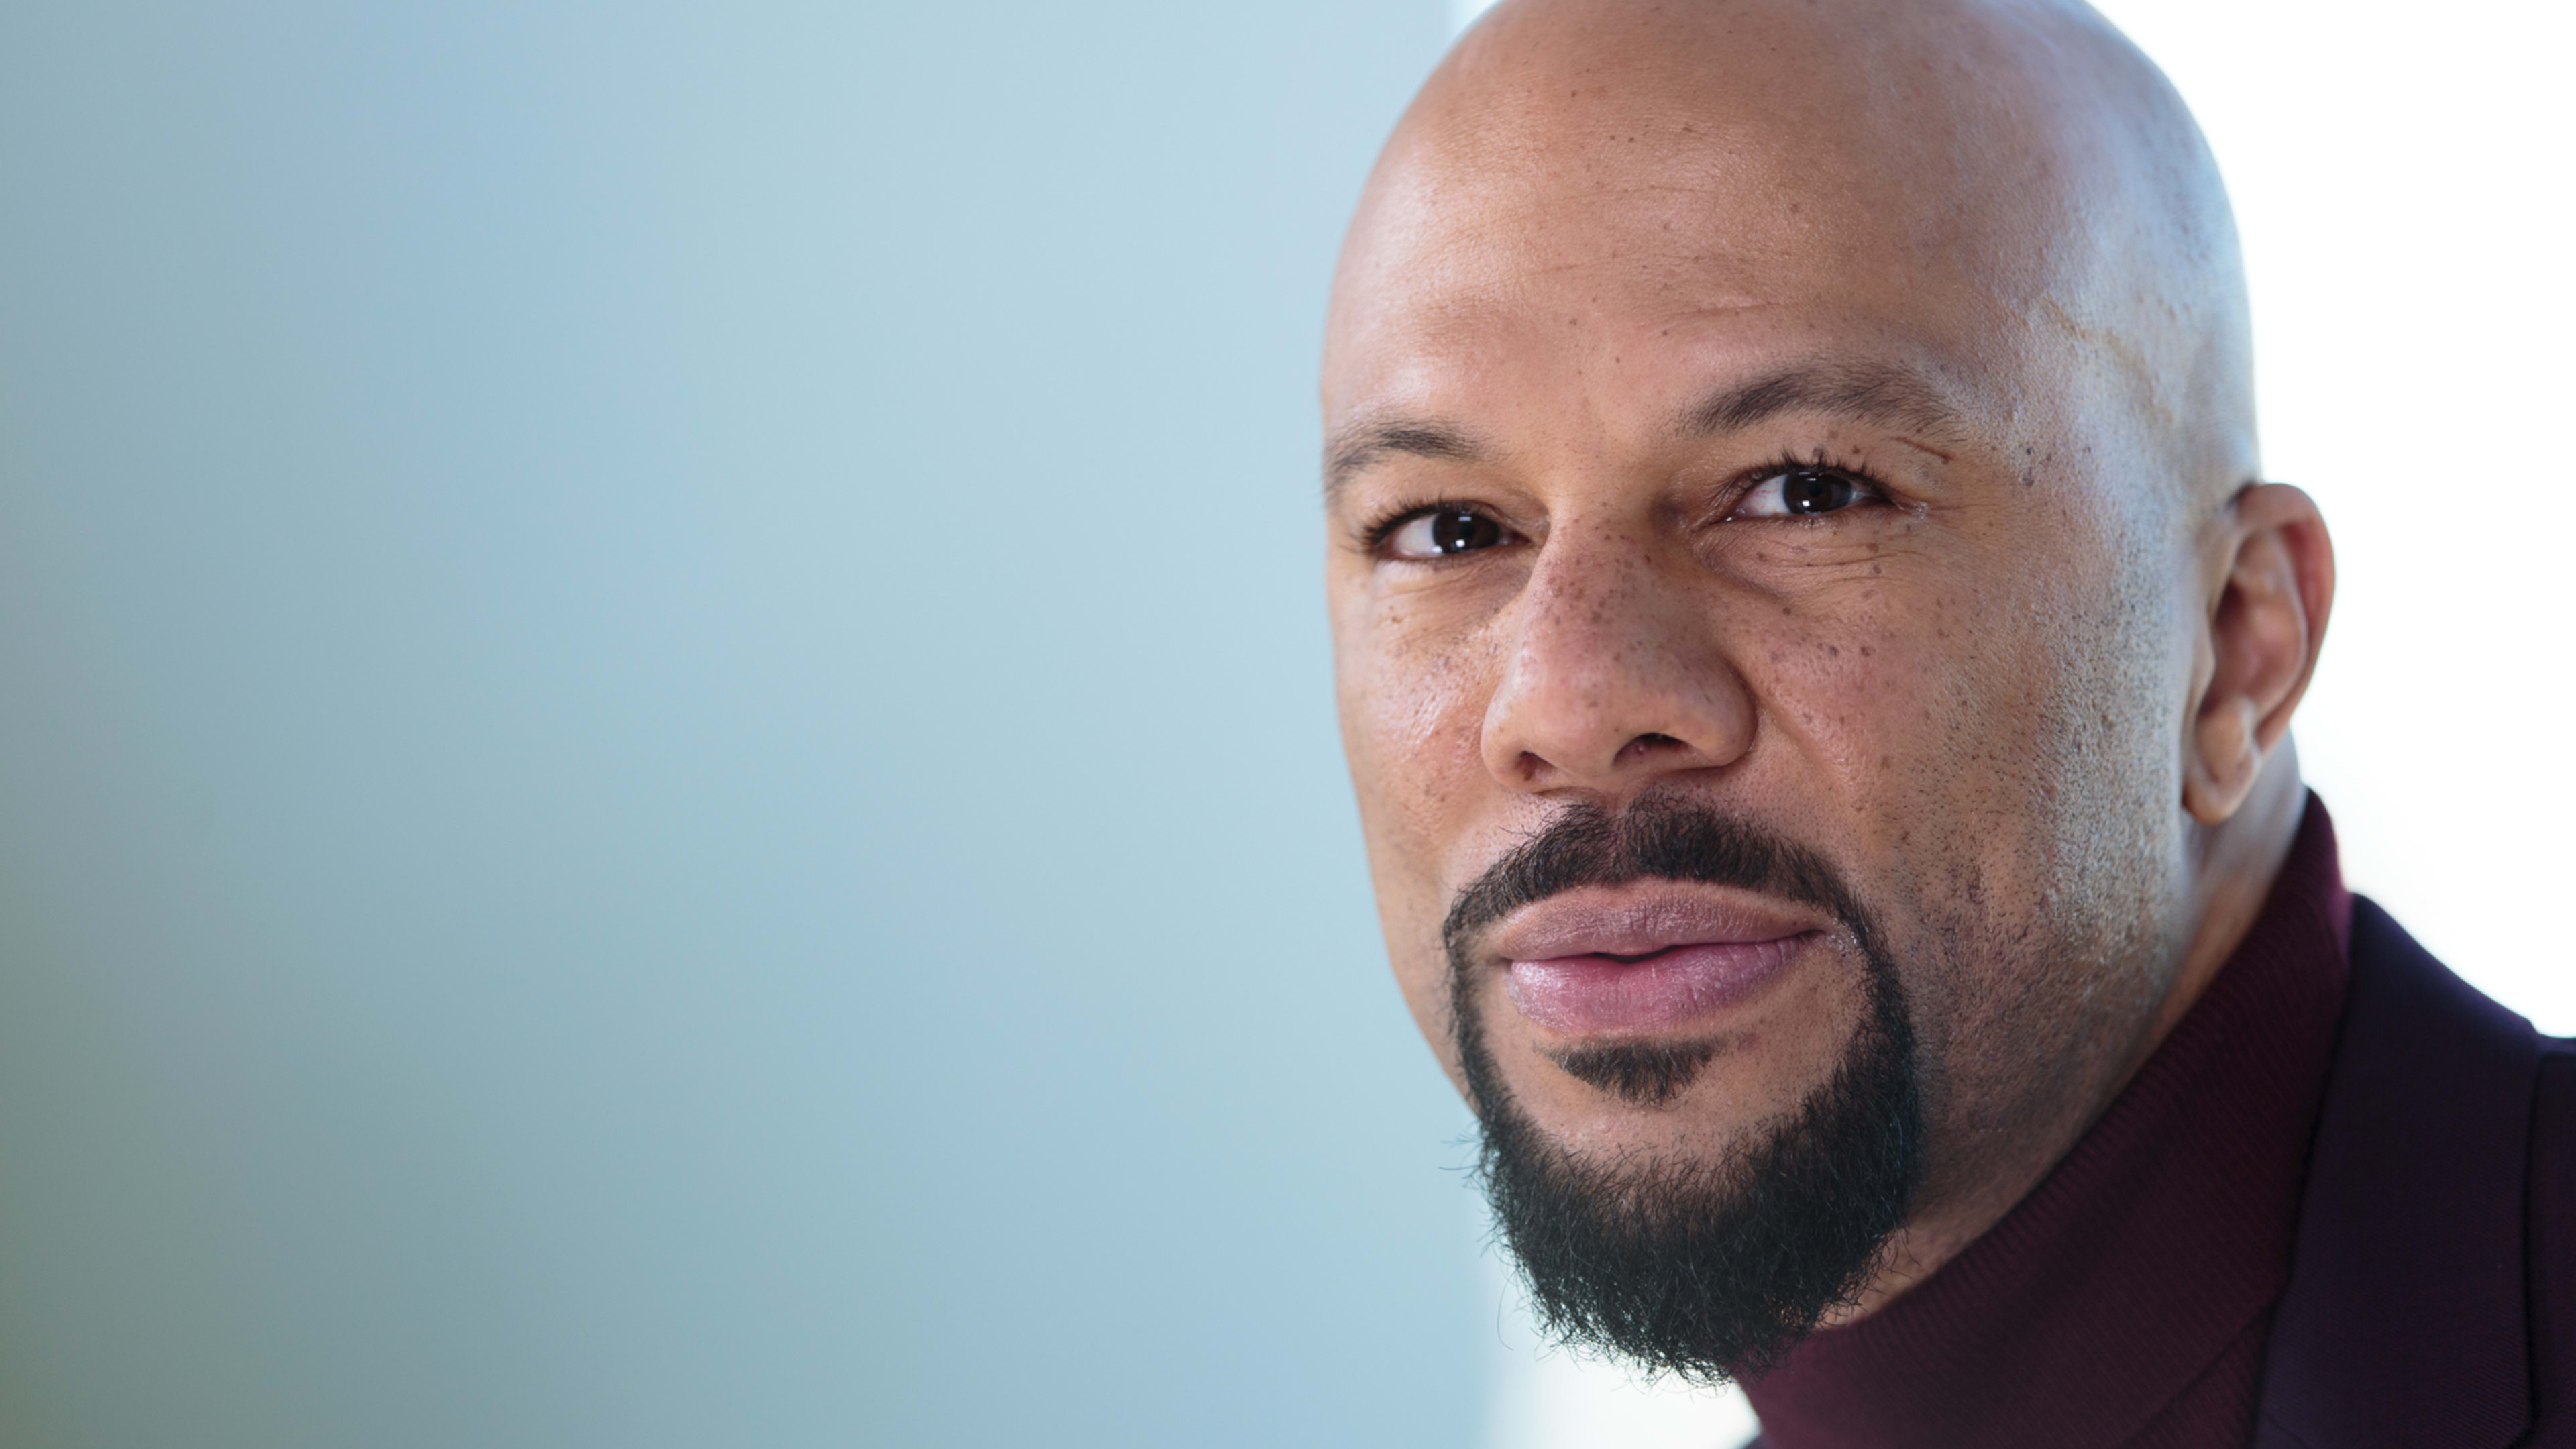 Oscar Winner Common: “Go Out And Make The Change Yourself”